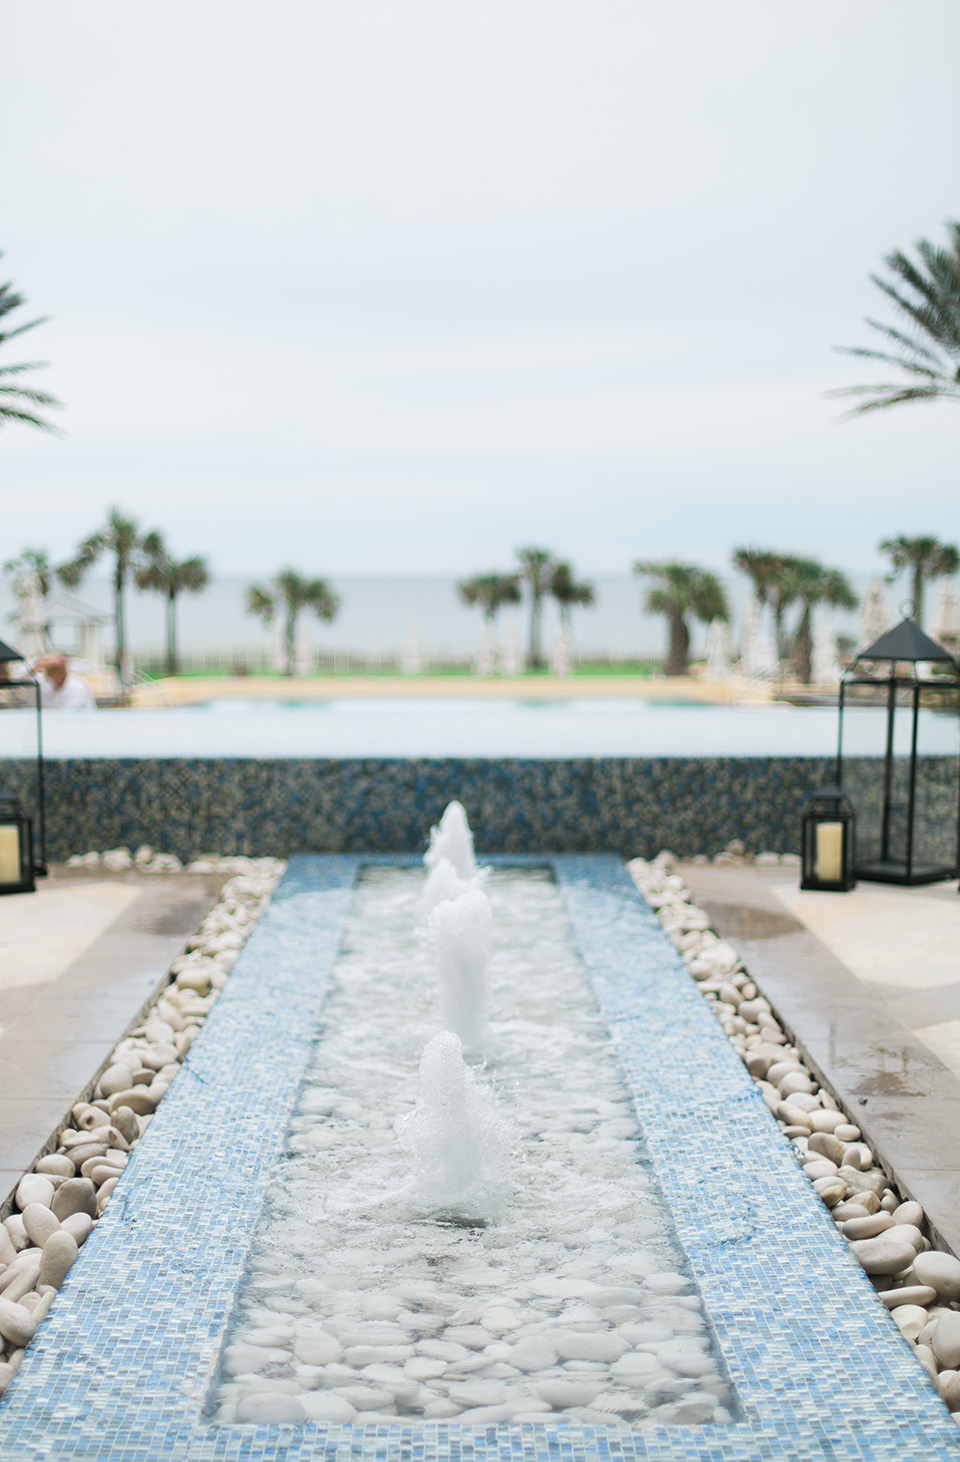 Picture of a fountain at the Omni Amelia Island Plantation Resort.